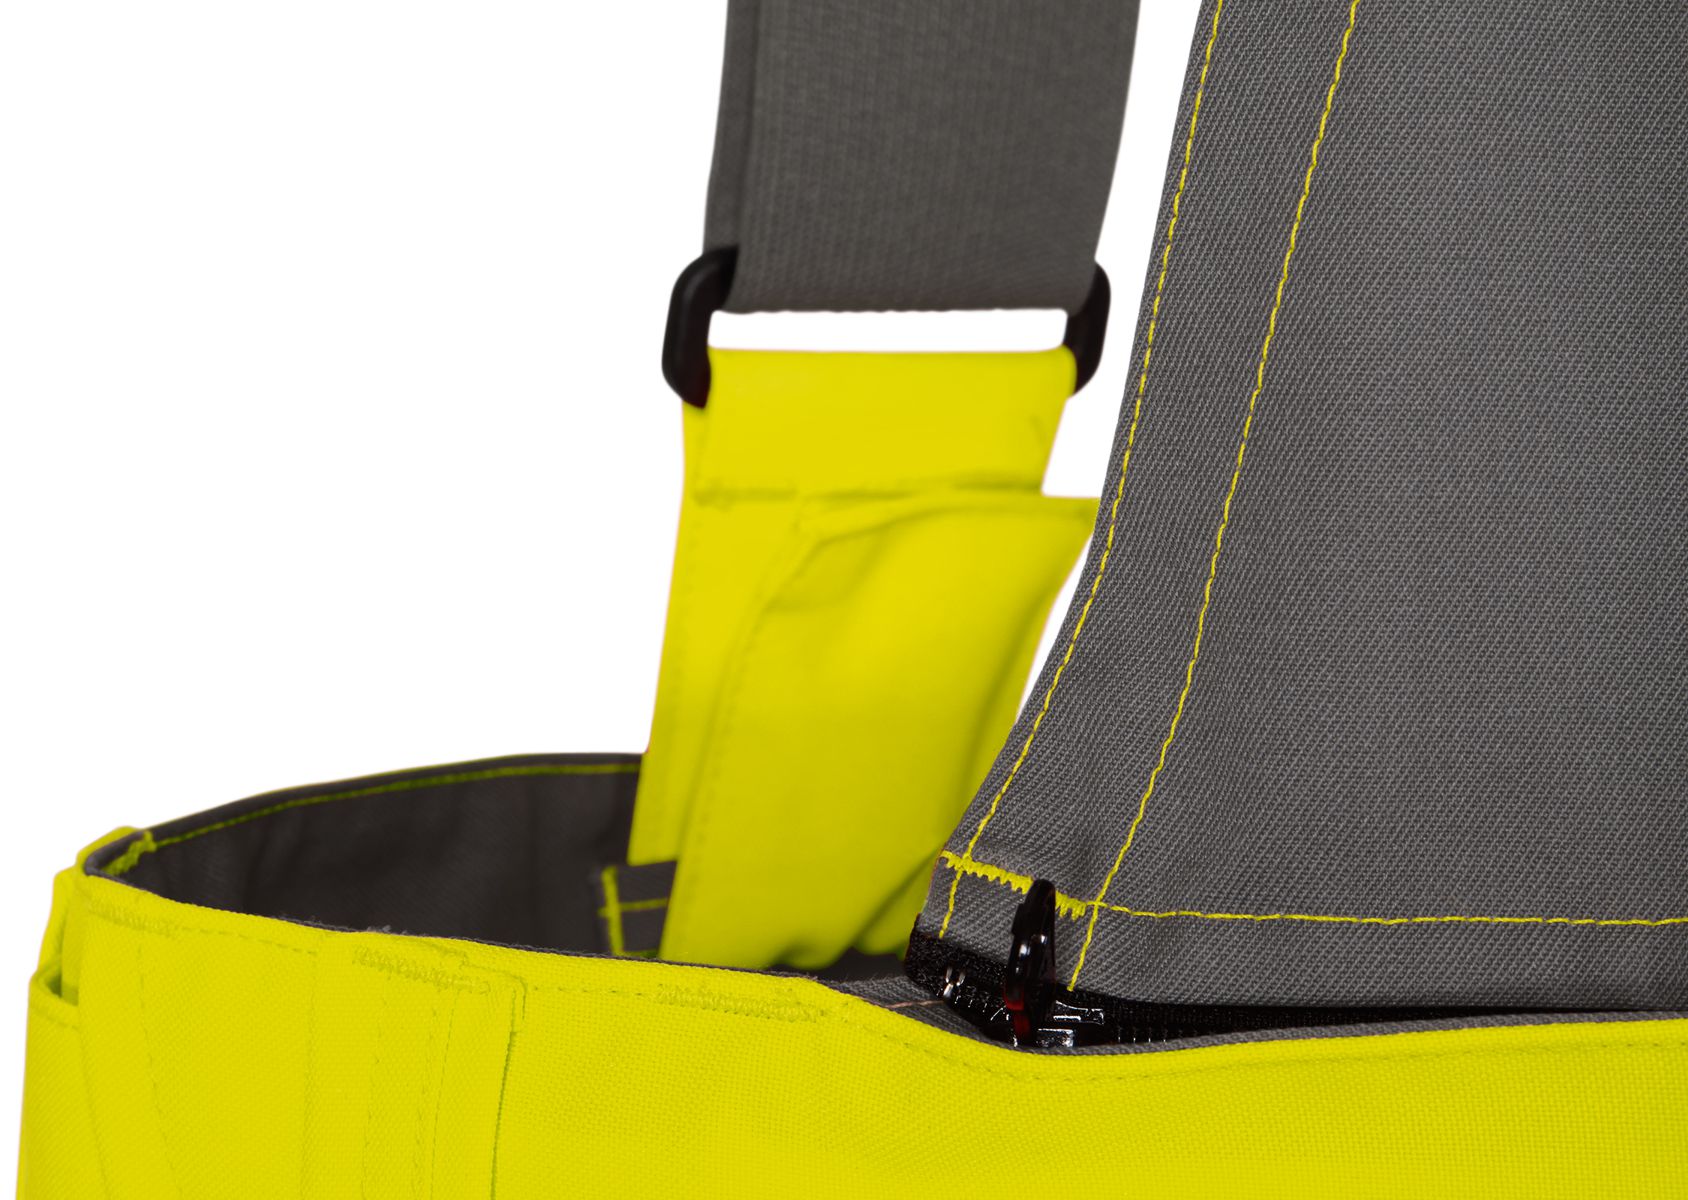 BP® High-visibility weatherproof trousers